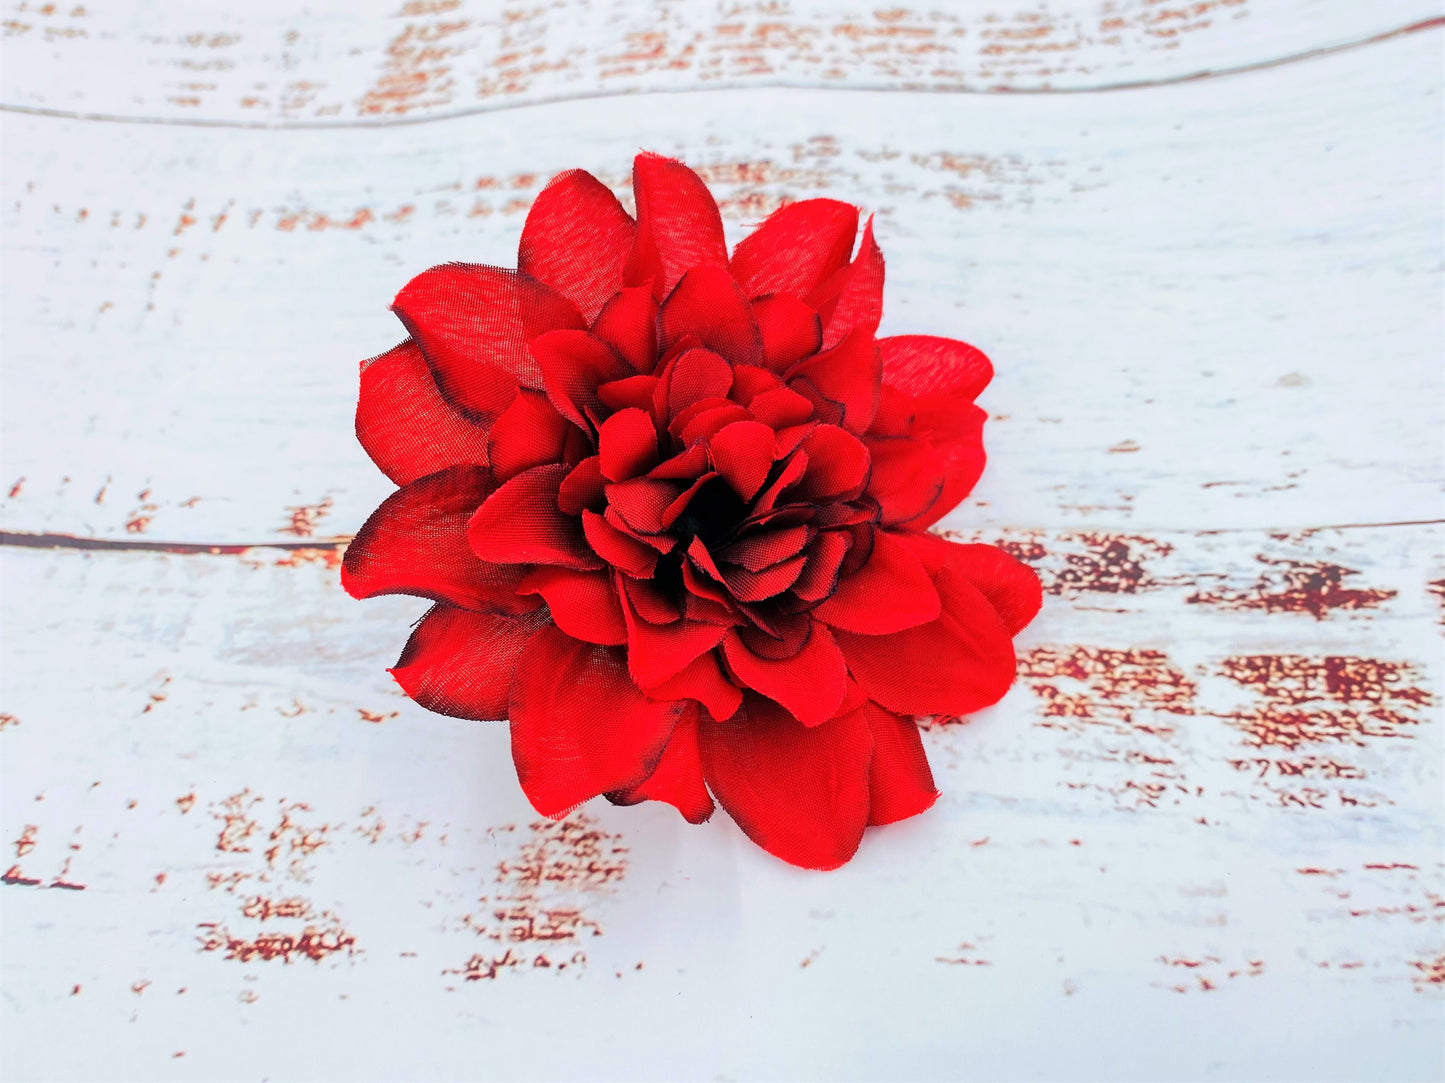 Load image into Gallery viewer, FF-JD20: Forever Flowerz Jumbo Dahlias – VARIANTS AVAILABLE
